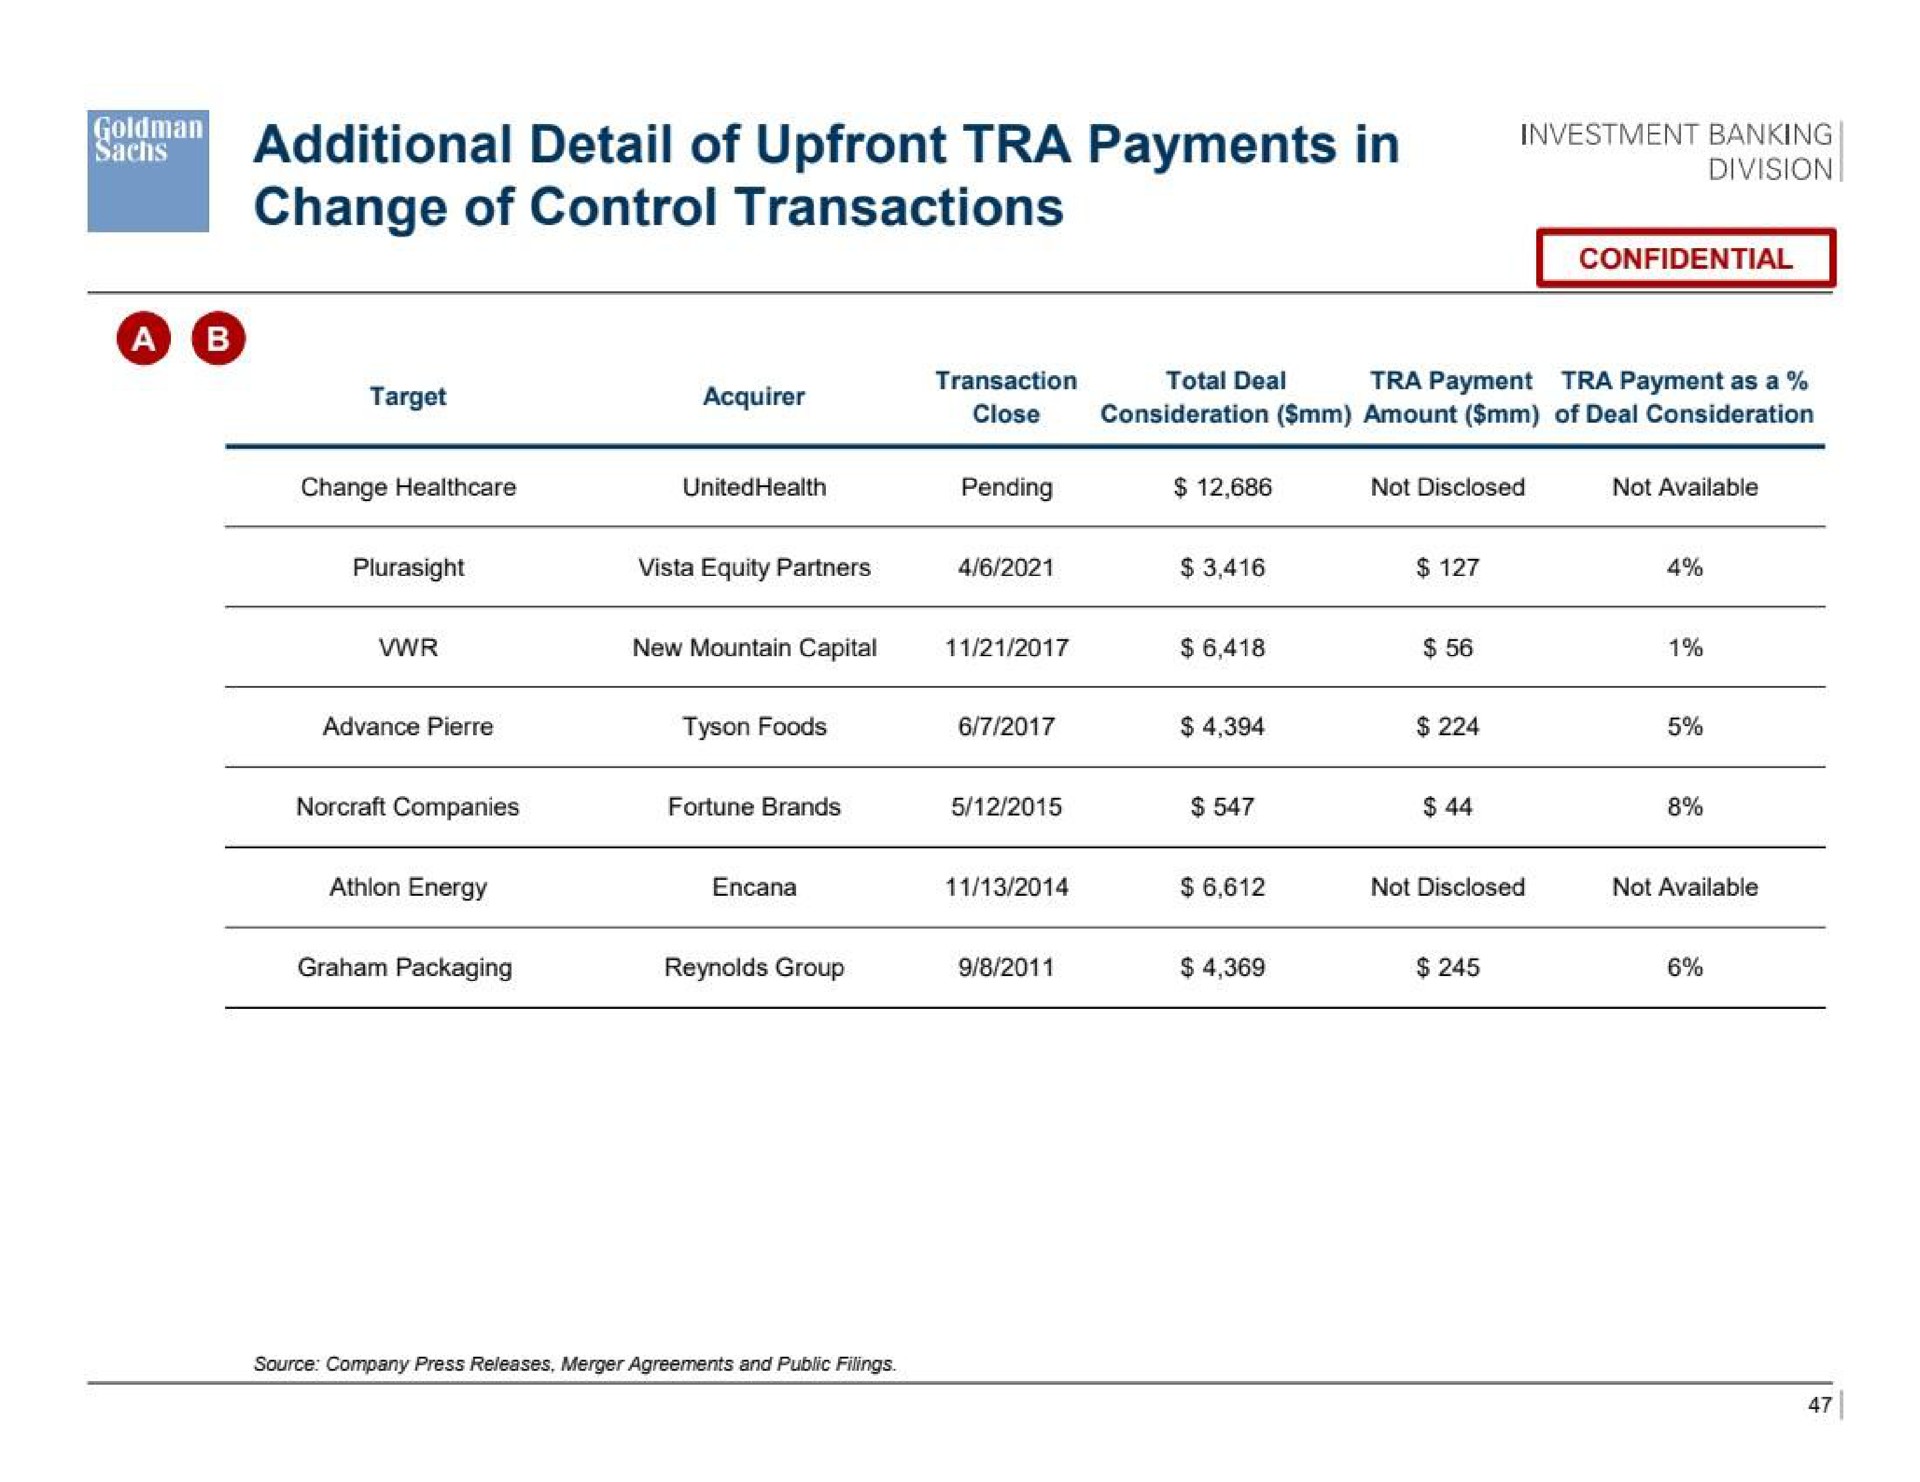 additional detail of tra payments in change of control transactions | Goldman Sachs